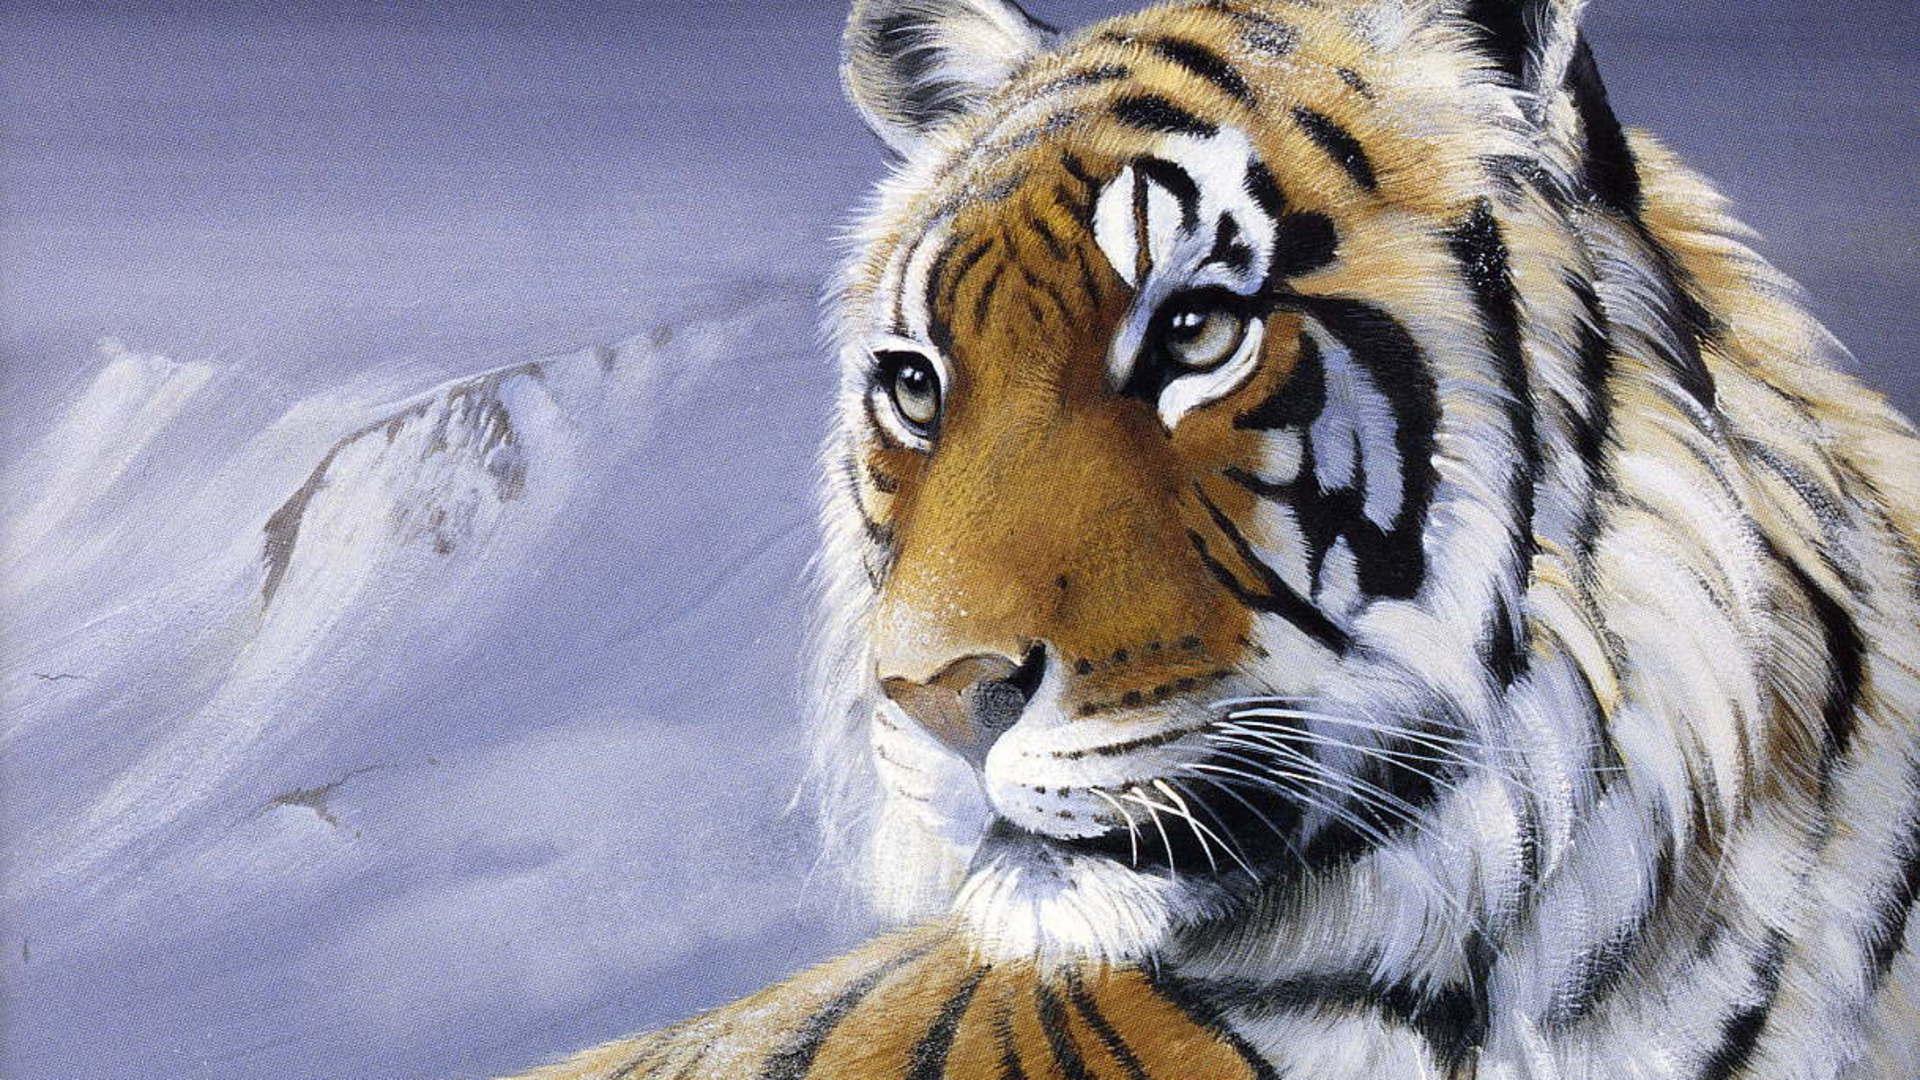 Wild Tiger Wallpapers Download - HD Great Images